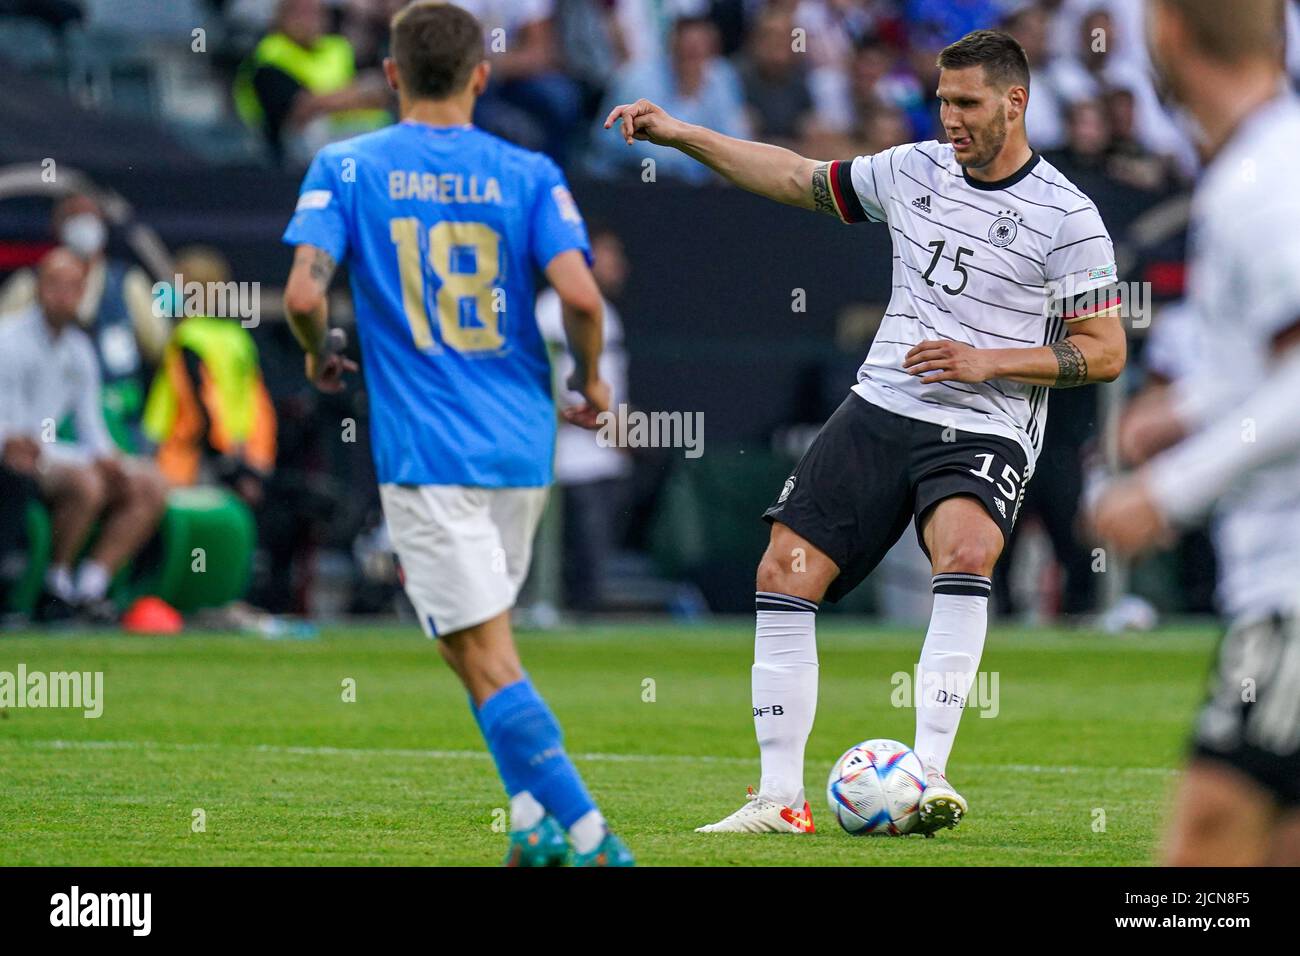 MöNCHENGLADBACH, GERMANY - JUNE 14: Niklas Sule of Germany during the UEFA Nations League match between Germany and Italy at Borussia-Park on June 14, 2022 in Mönchengladbach, Germany (Photo by Joris Verwijst/Orange Pictures) Stock Photo